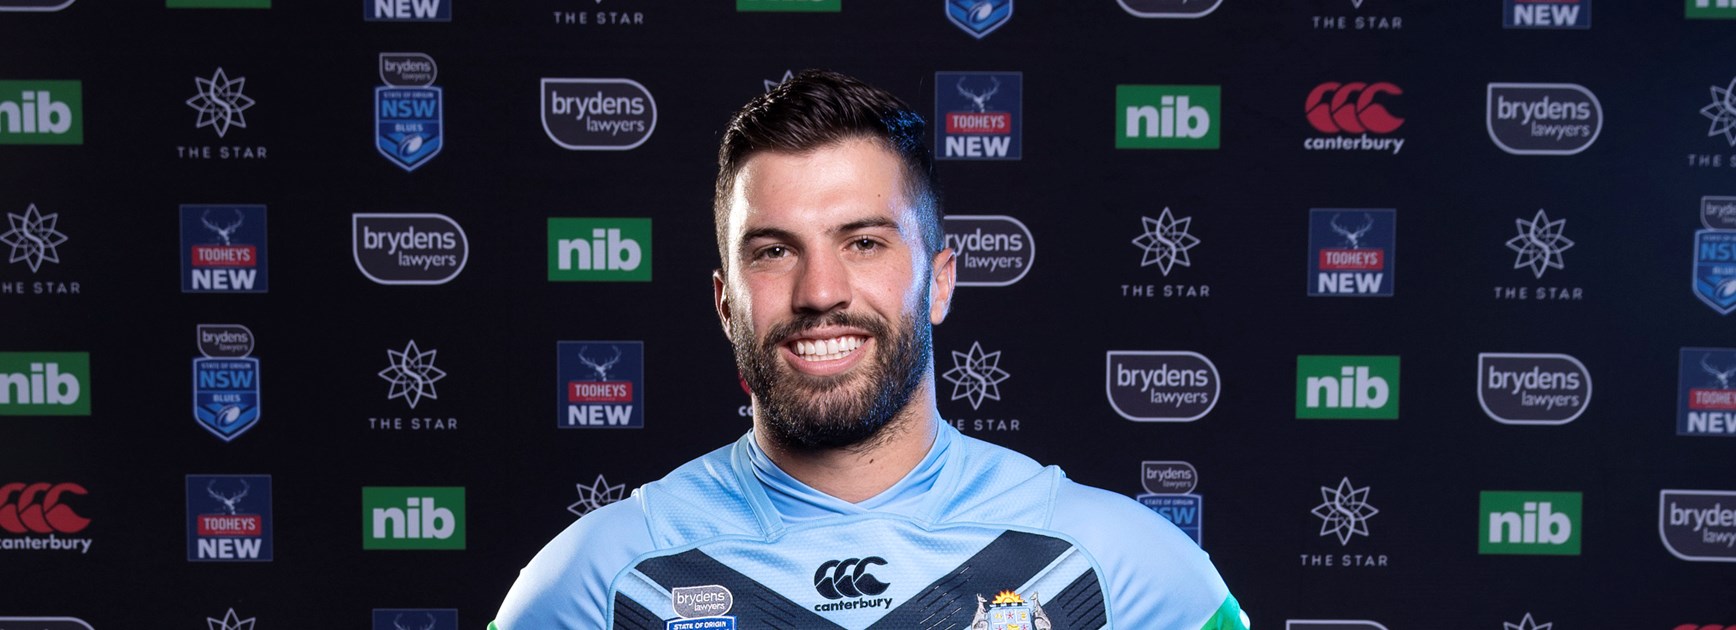 Roosters recruit Tedesco quarantined with mumps